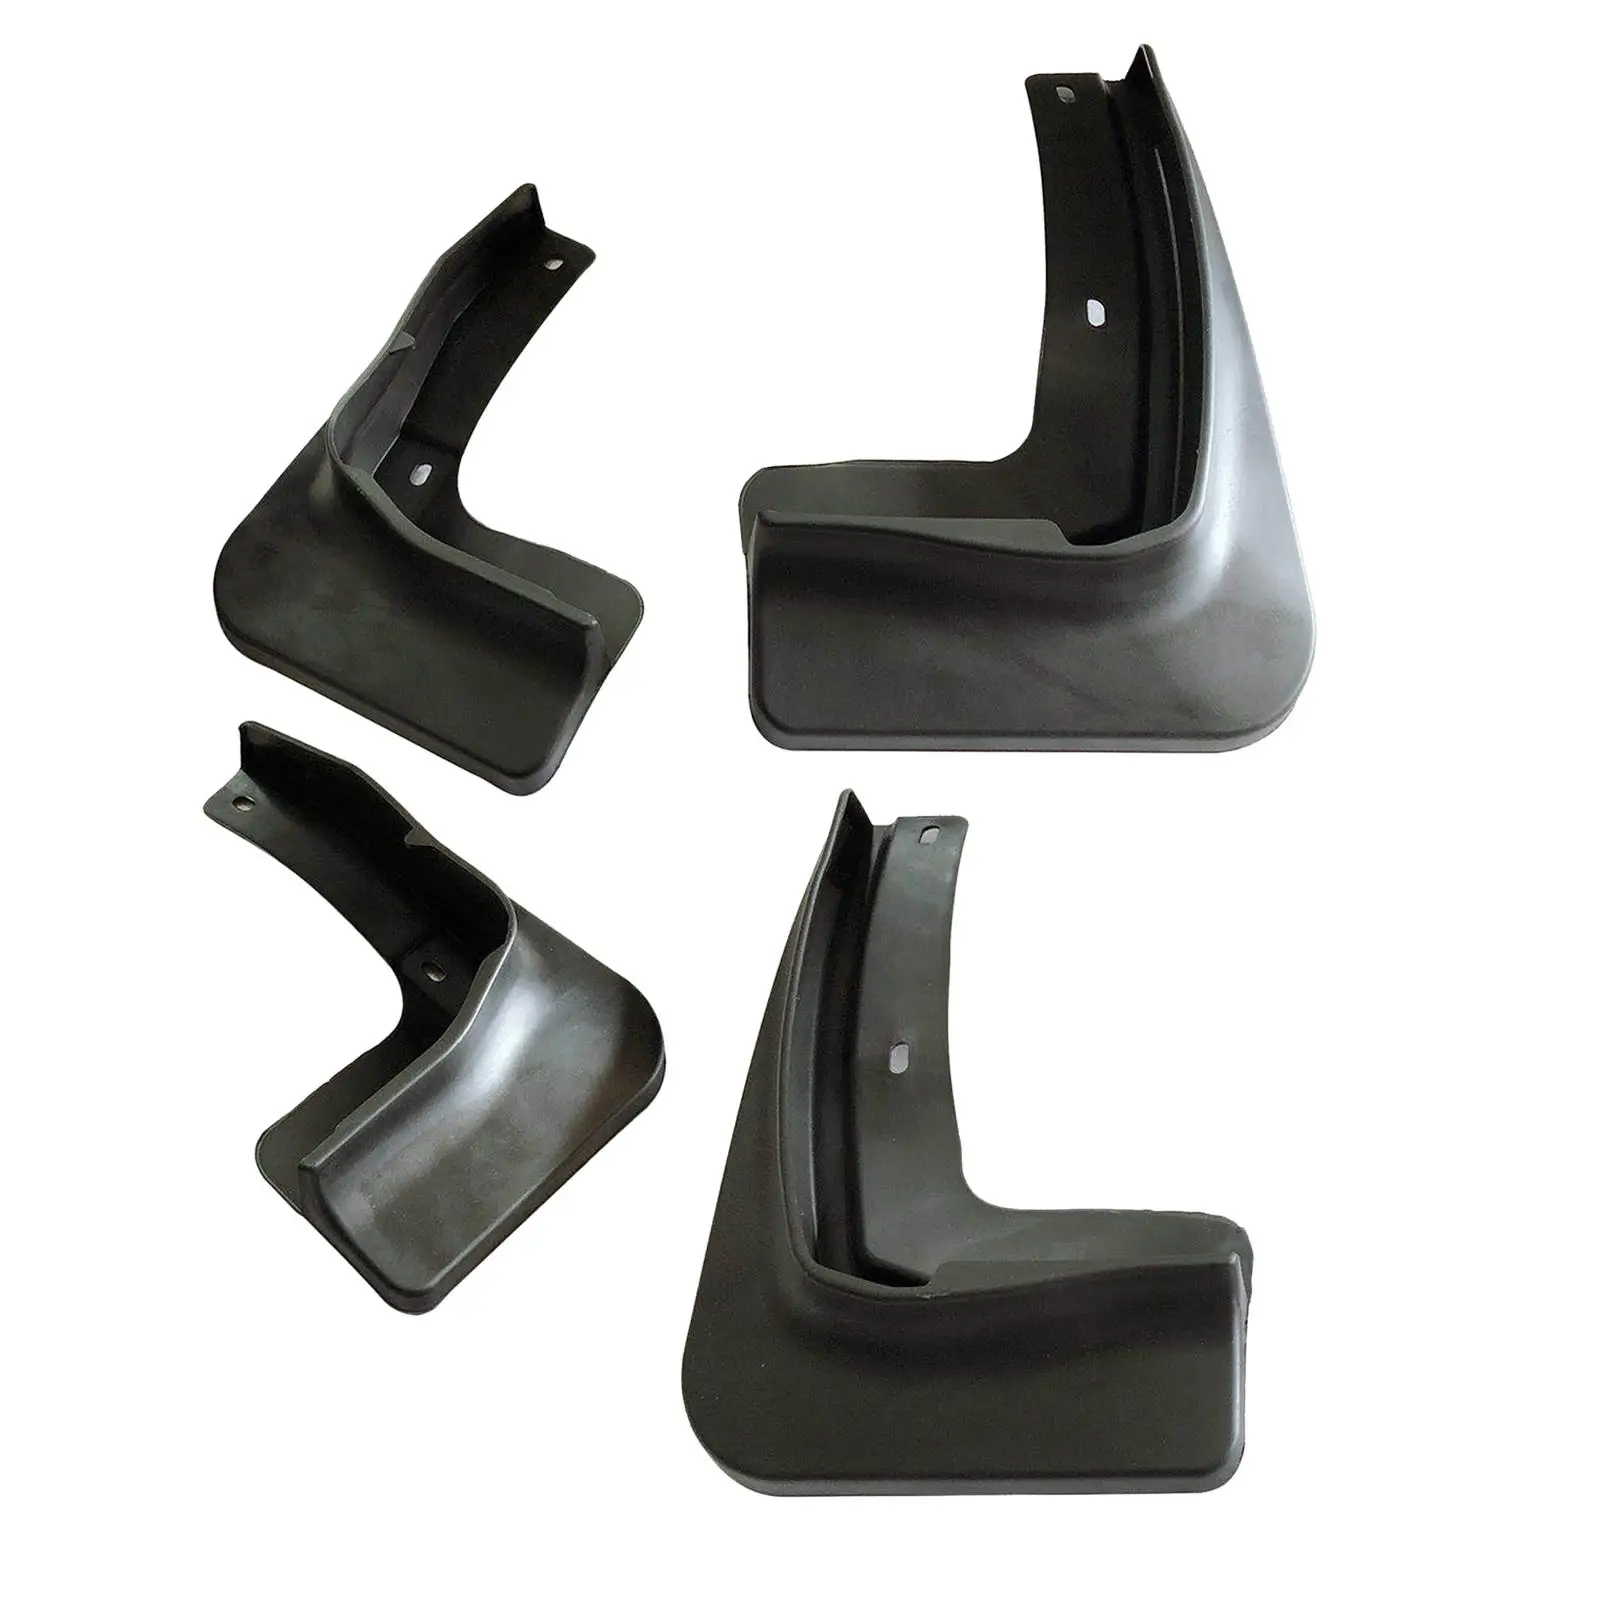 4x Car Mudguard Muds Guard Flap Easy to Install for Byd Yuan Plus